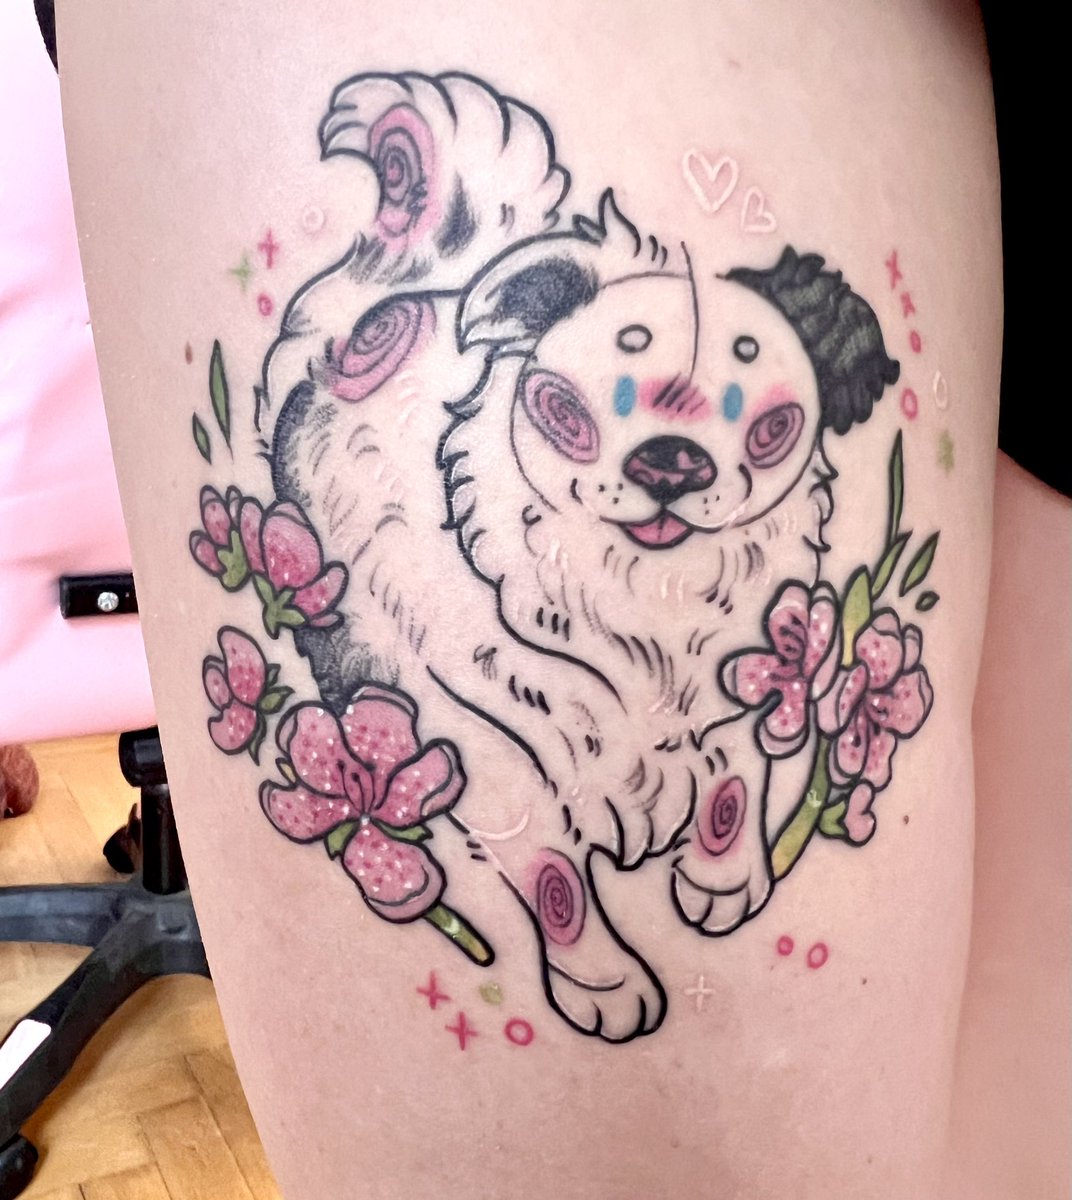 「New tattoo! Wanted something relating to」|Cheer 🐶🌸 @zinesのイラスト